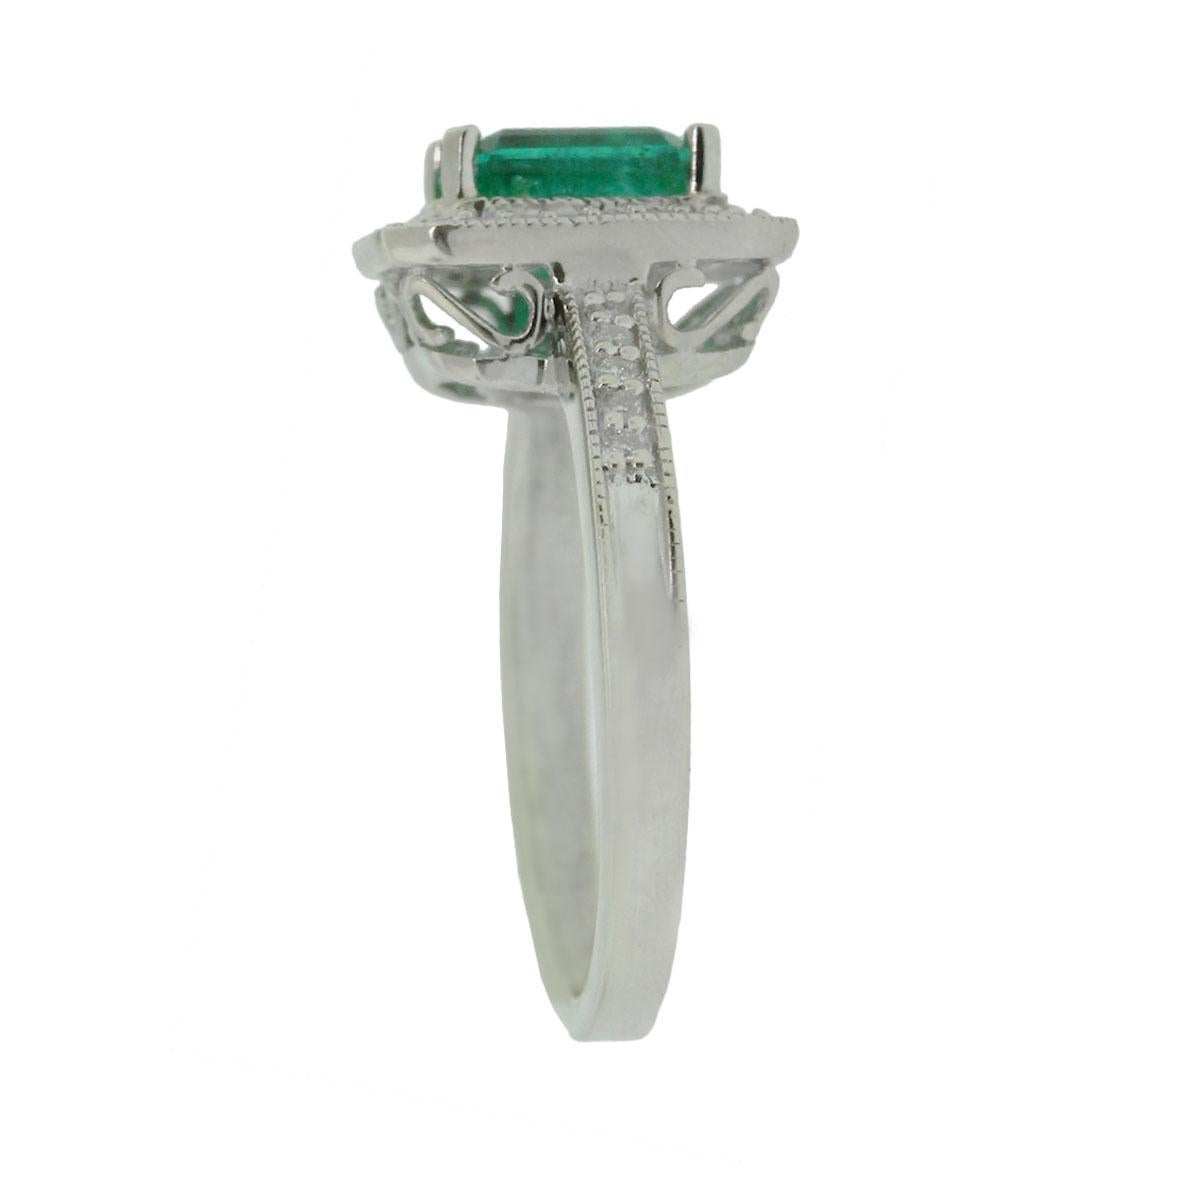 Material-14k White Gold
Gemstone Details-Emerald Cut Emerald apprx. 1.32ctw , Measuring 7mm x 6mm 
Diamond details-Approx. 0.36 ctw of round cut diamonds. Diamonds are G/H in color and VS in clarity
Ring Size-6.50 (can be sized)
Total Weight-4.9g